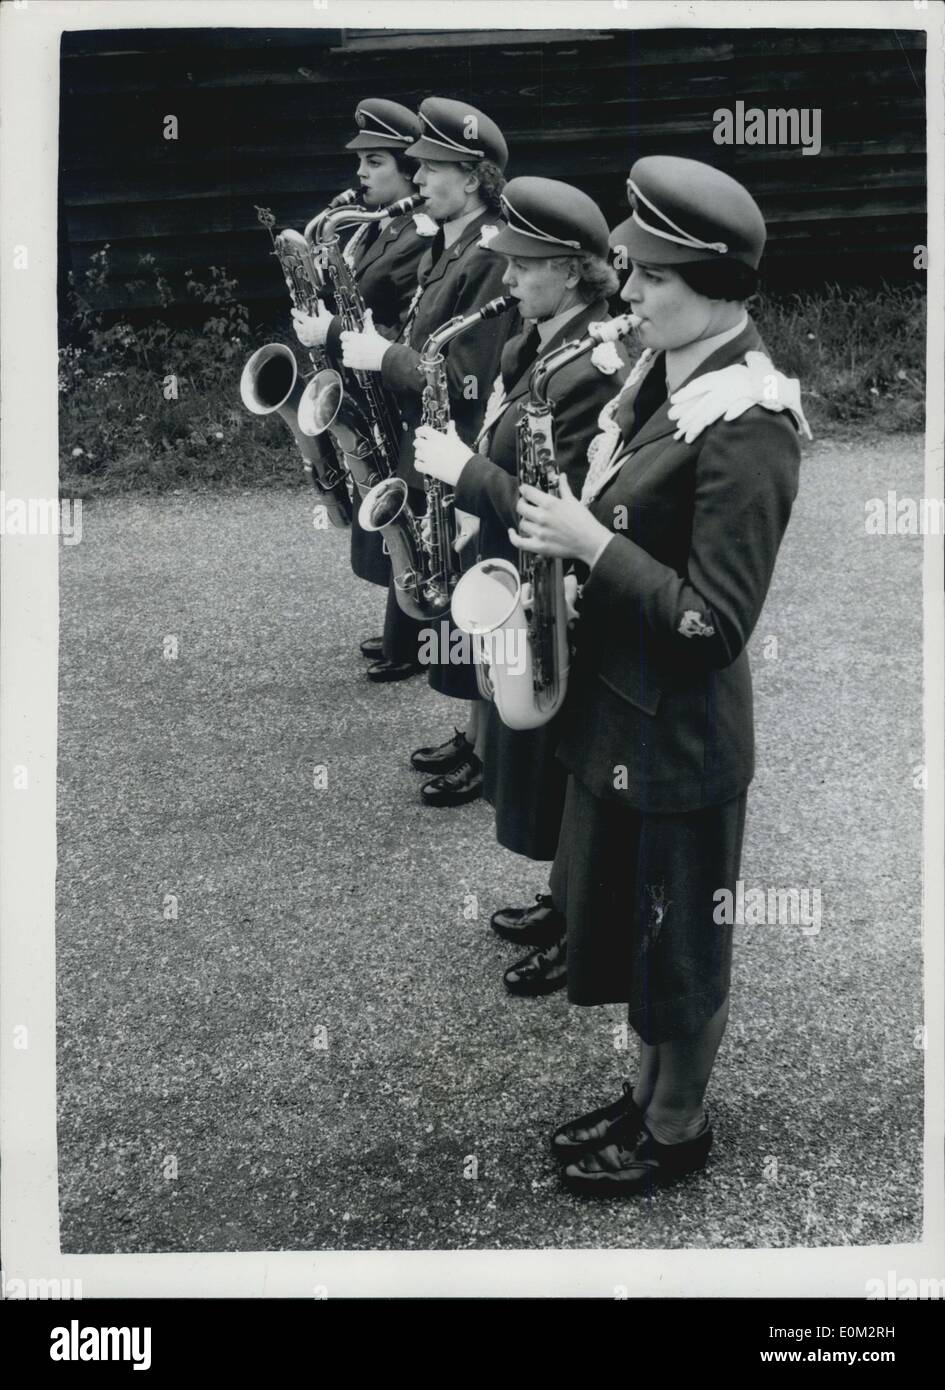 May 11, 1953 - WRAF Band Prepare for Royal Tournament: Members of teh WRAF band are practising at the Uxbridge headquarters, for the Royal Tournament. Photo shows WRAF saxophonists seen at practise at Uxbridge. (L to R): LACW, V. Evans, Saow, E. Harris, SAow, S. Moulson, and Laow, J. Marples. Stock Photo